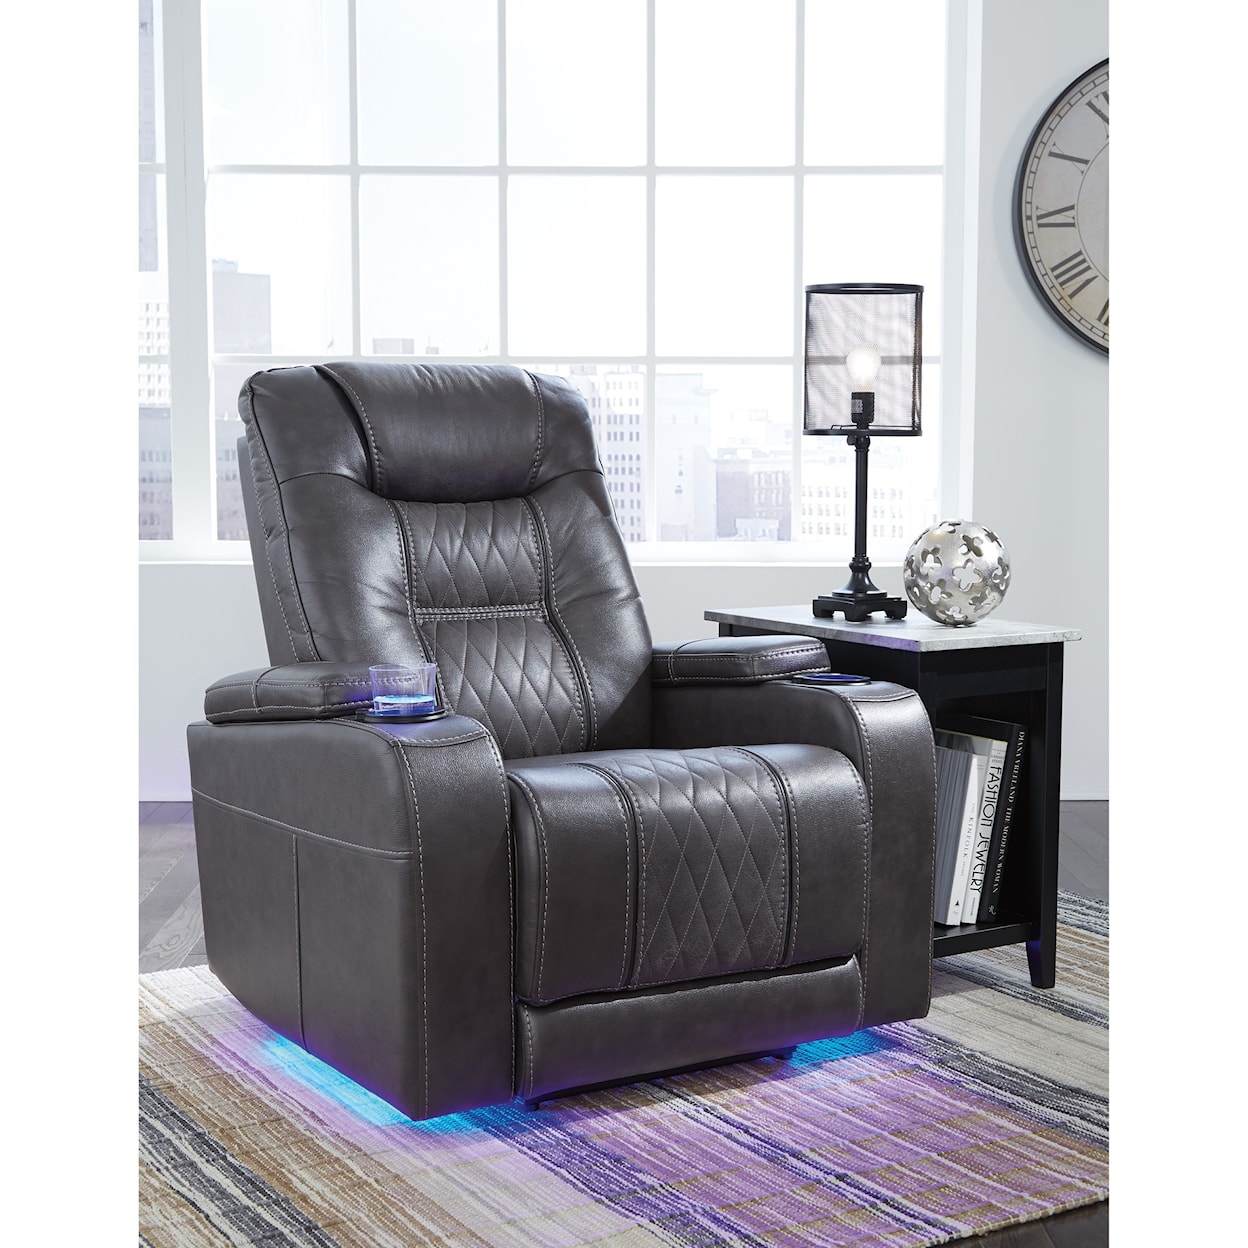 Signature Design by Ashley Furniture Composer Power Recliner